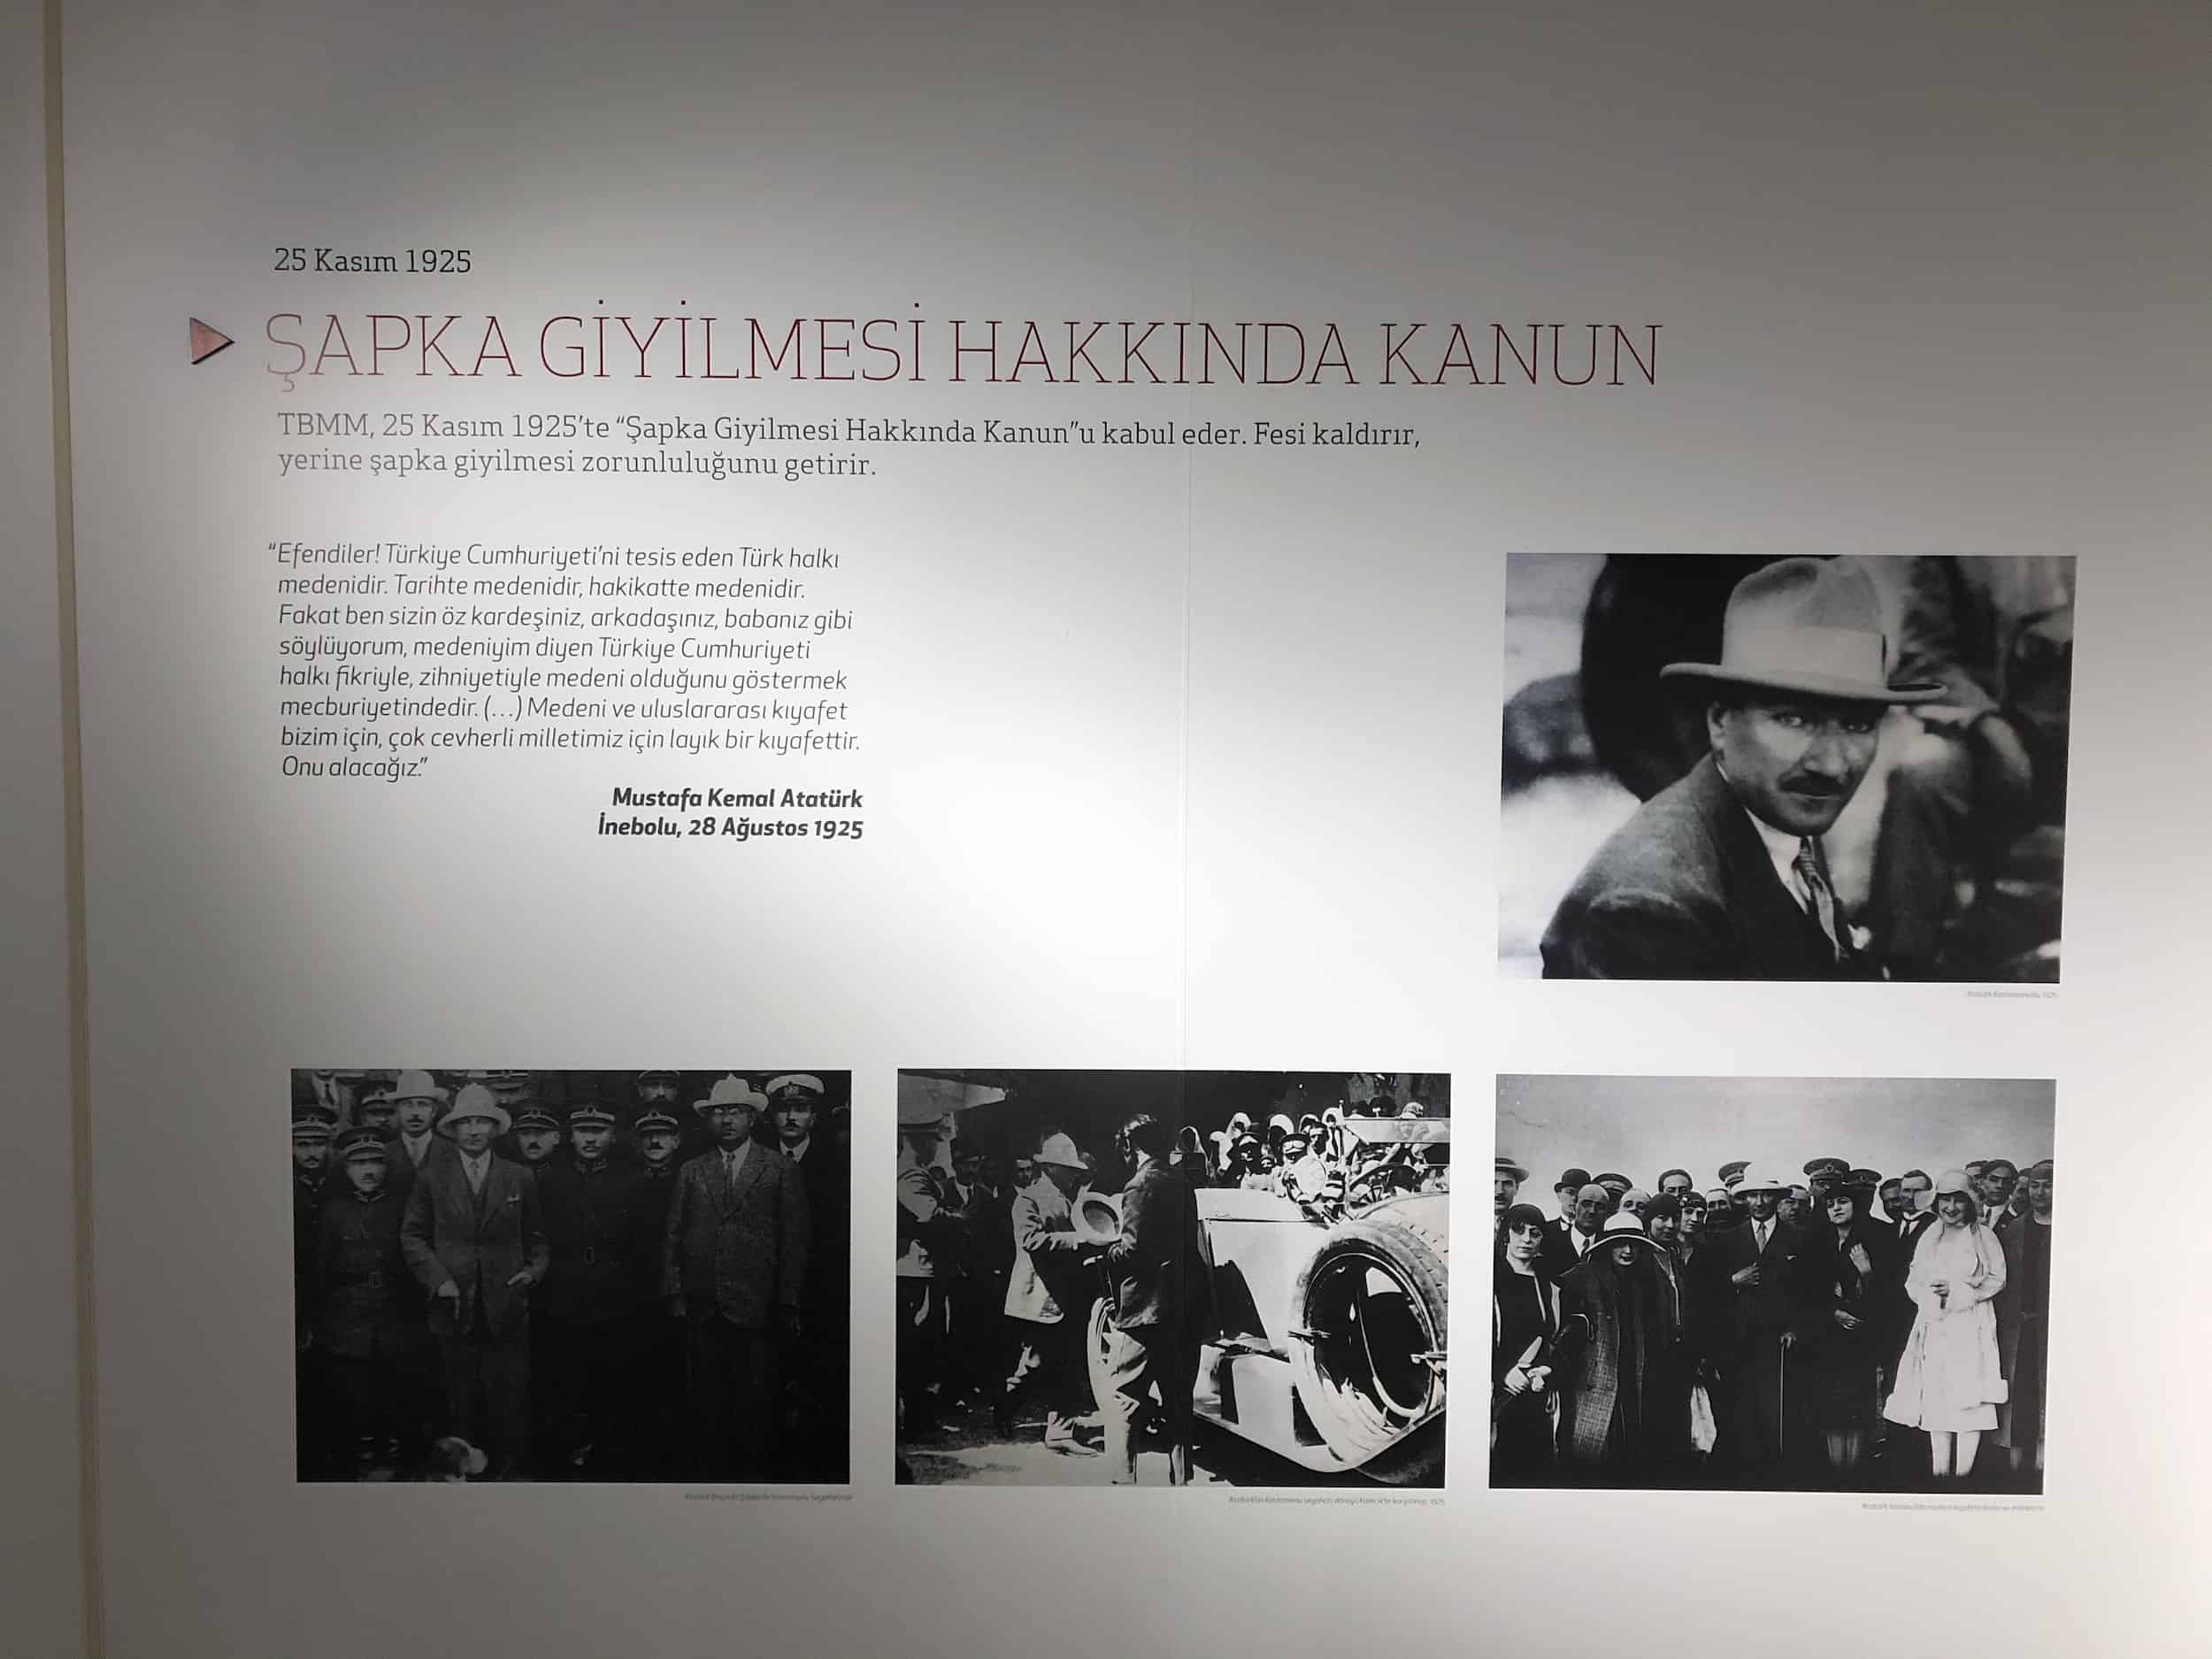 The 1925 "Hat Law" at the Anadolu University Republic History Museum 